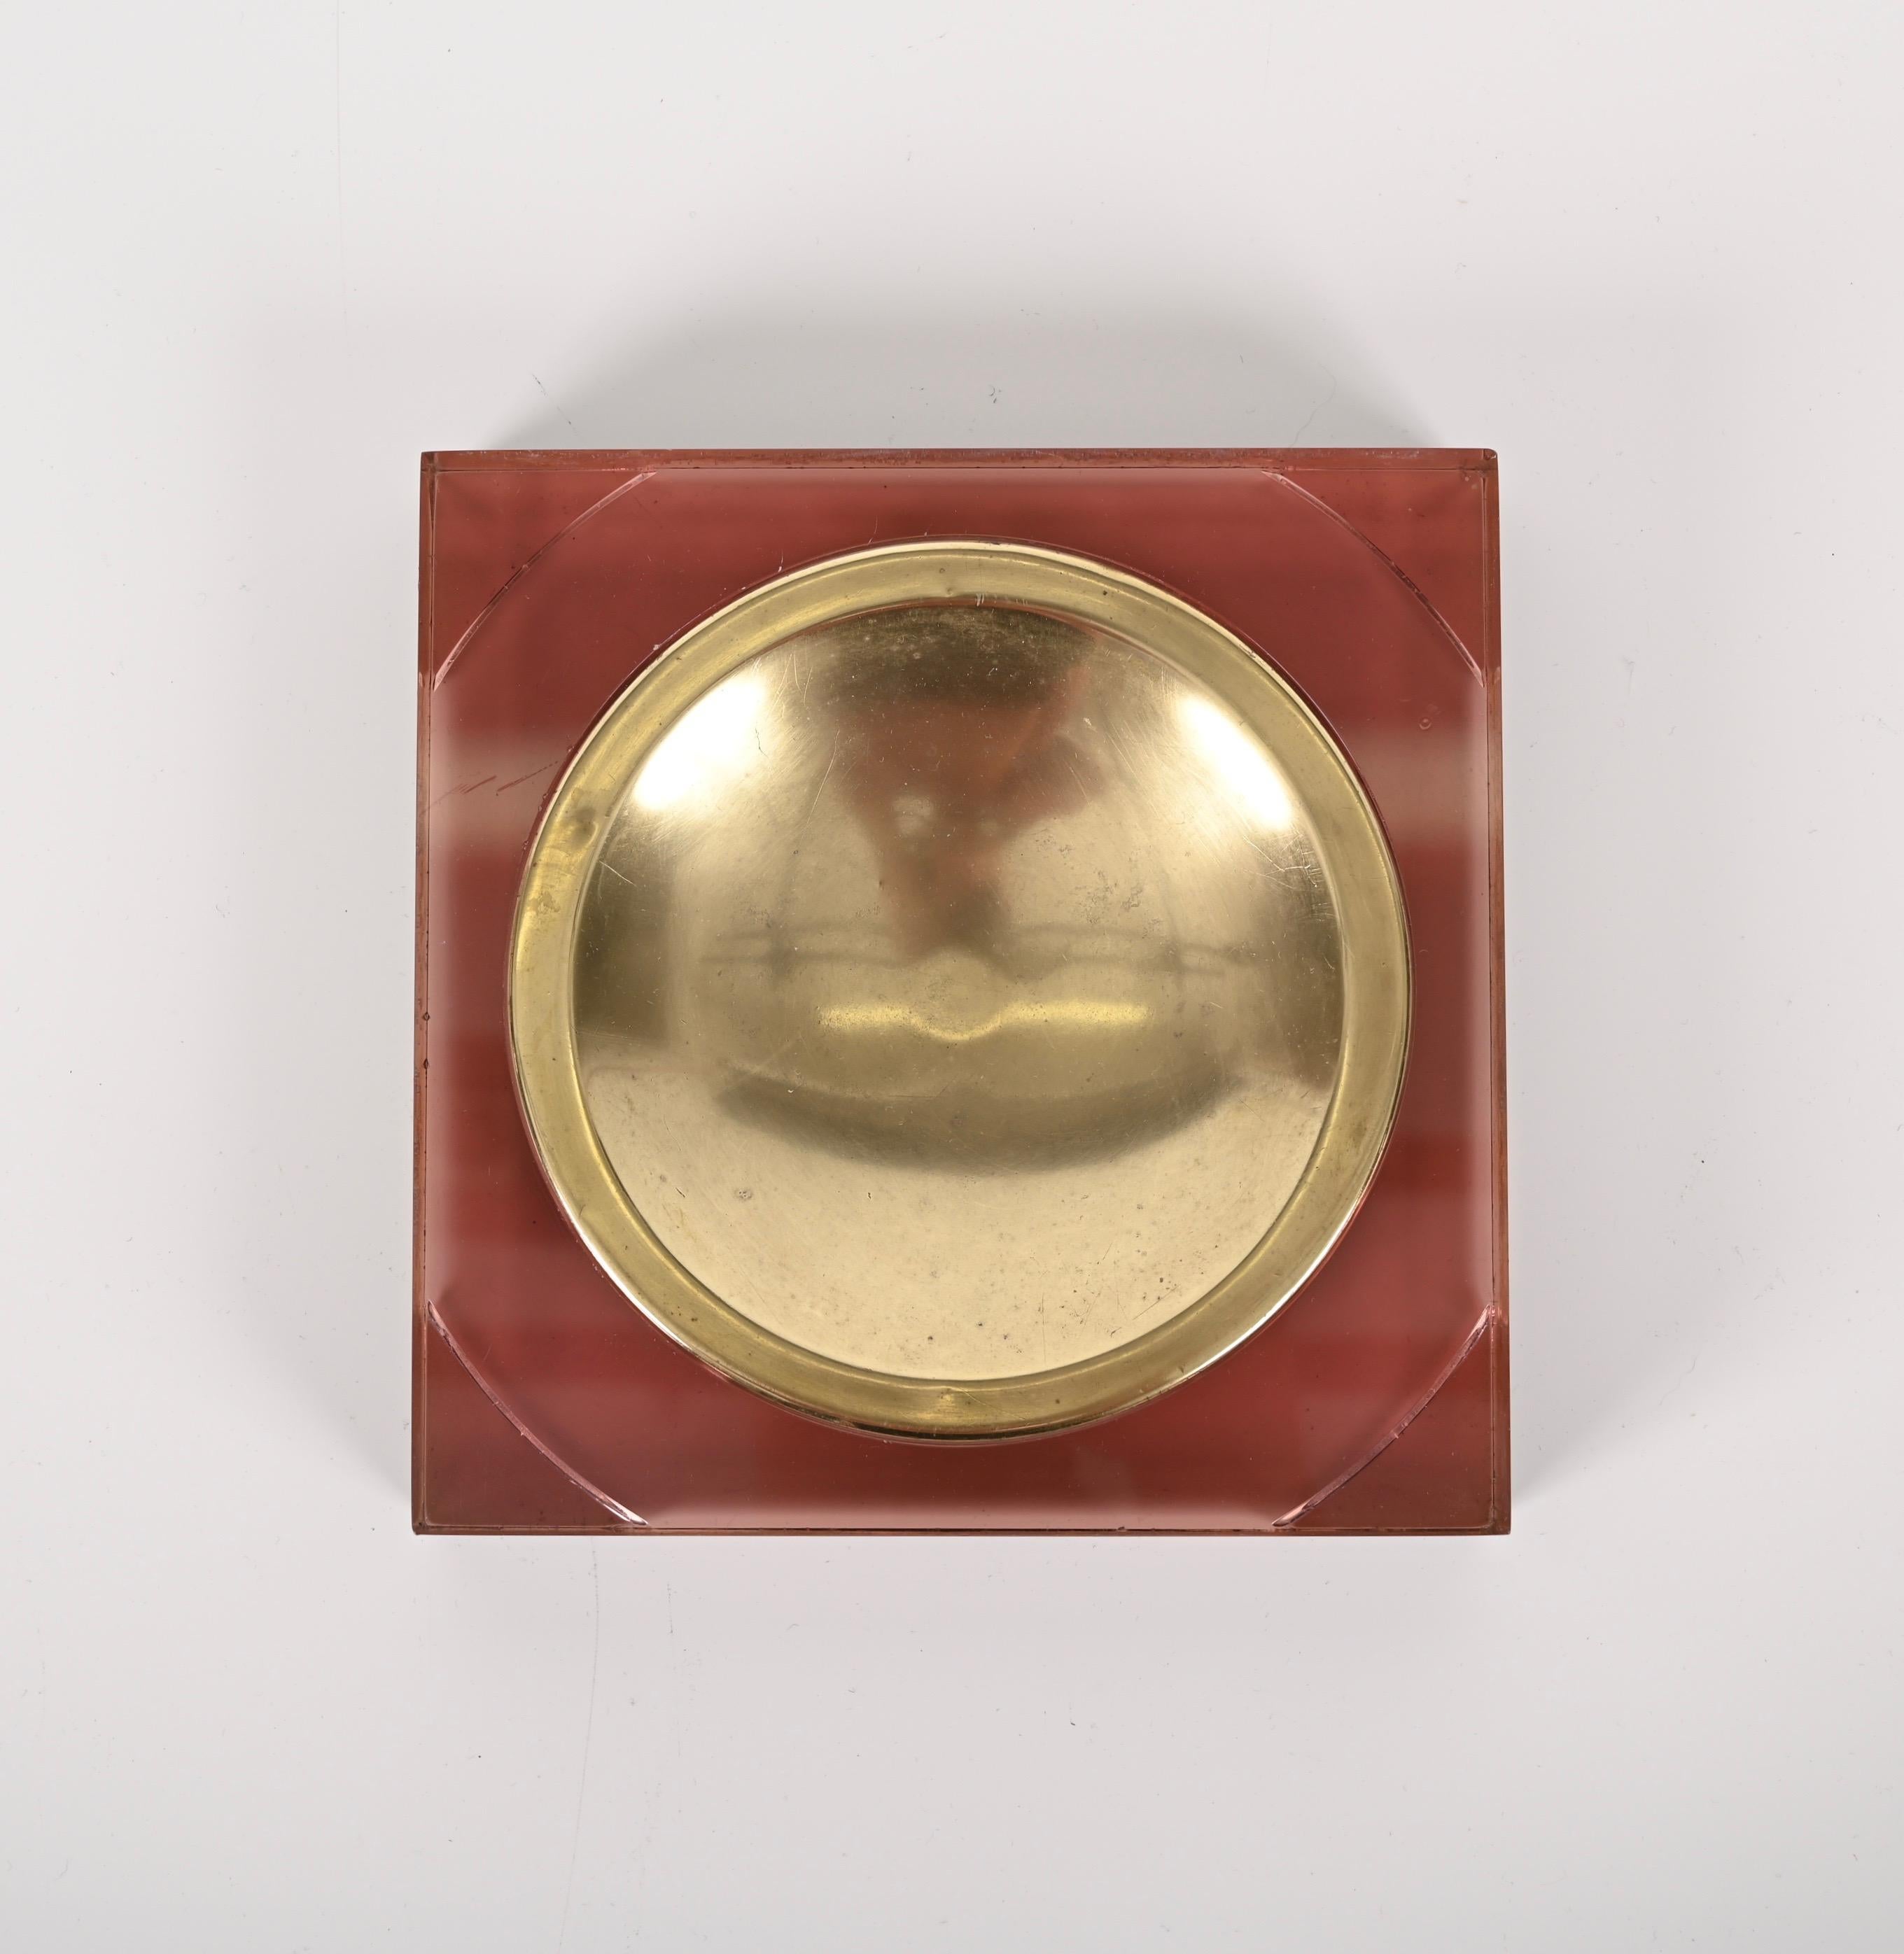 Midcentury Square Lucite and Brass Pocket Emptier, Dior Style, France, 1970 For Sale 4